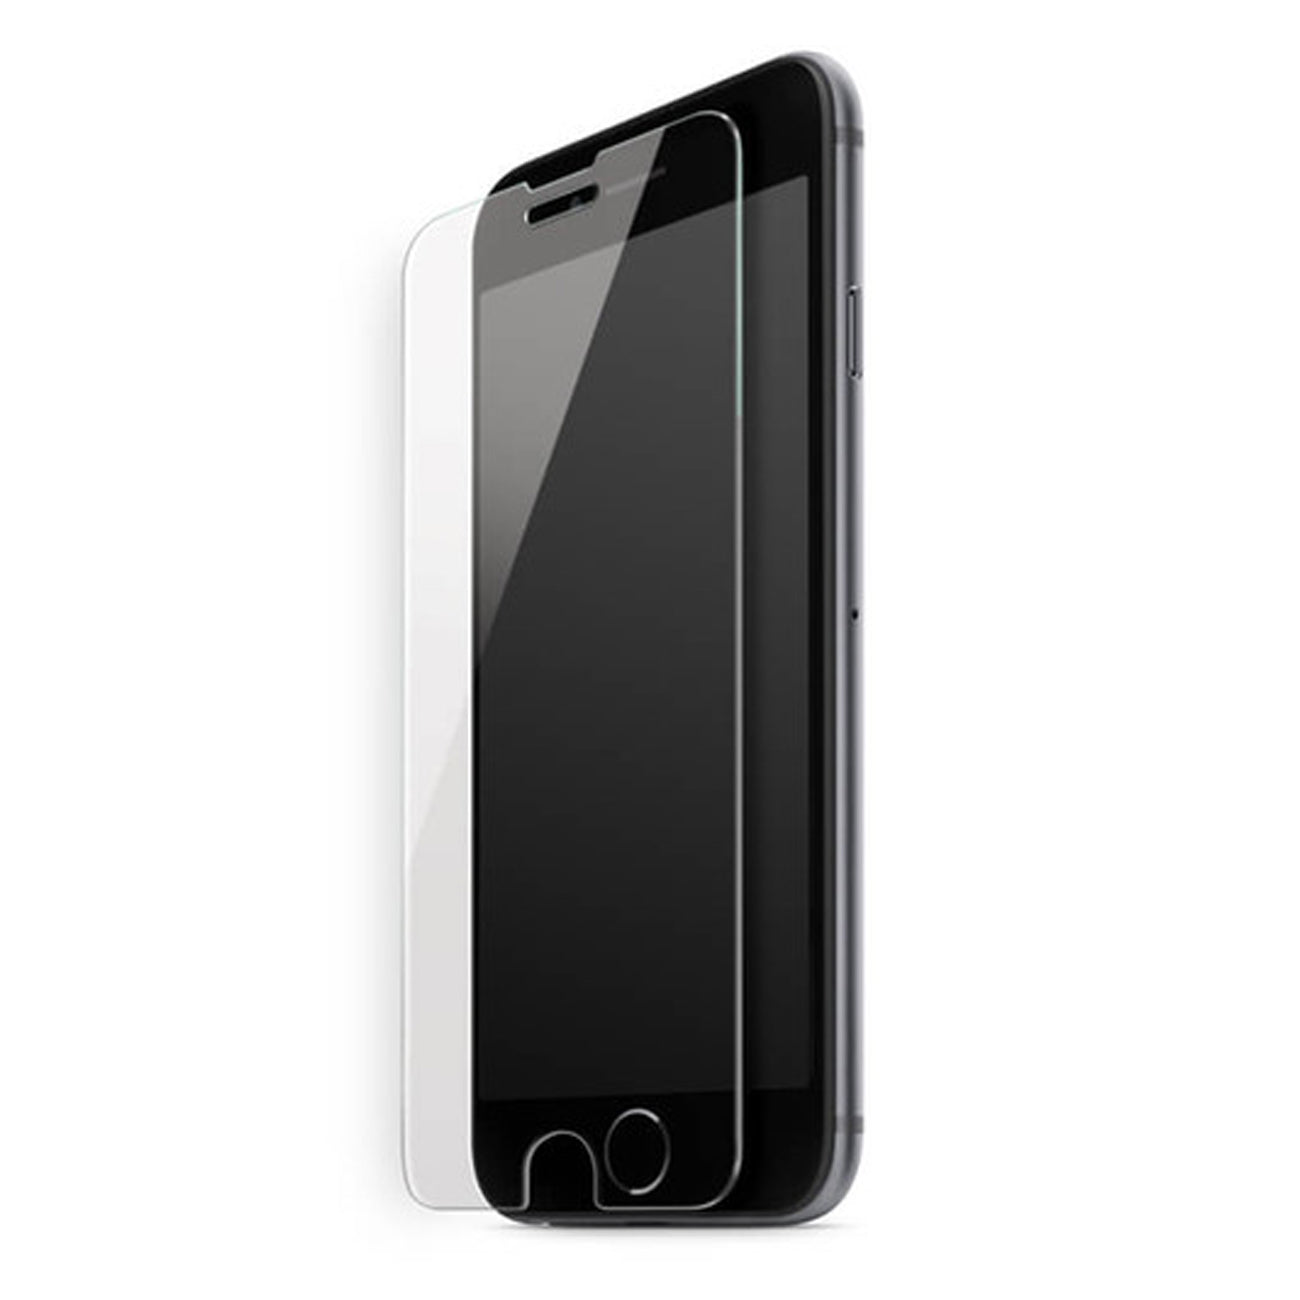 Premium Single retail Pack 2.5D Tempered Glass for iPhone 6/7/8 Plus